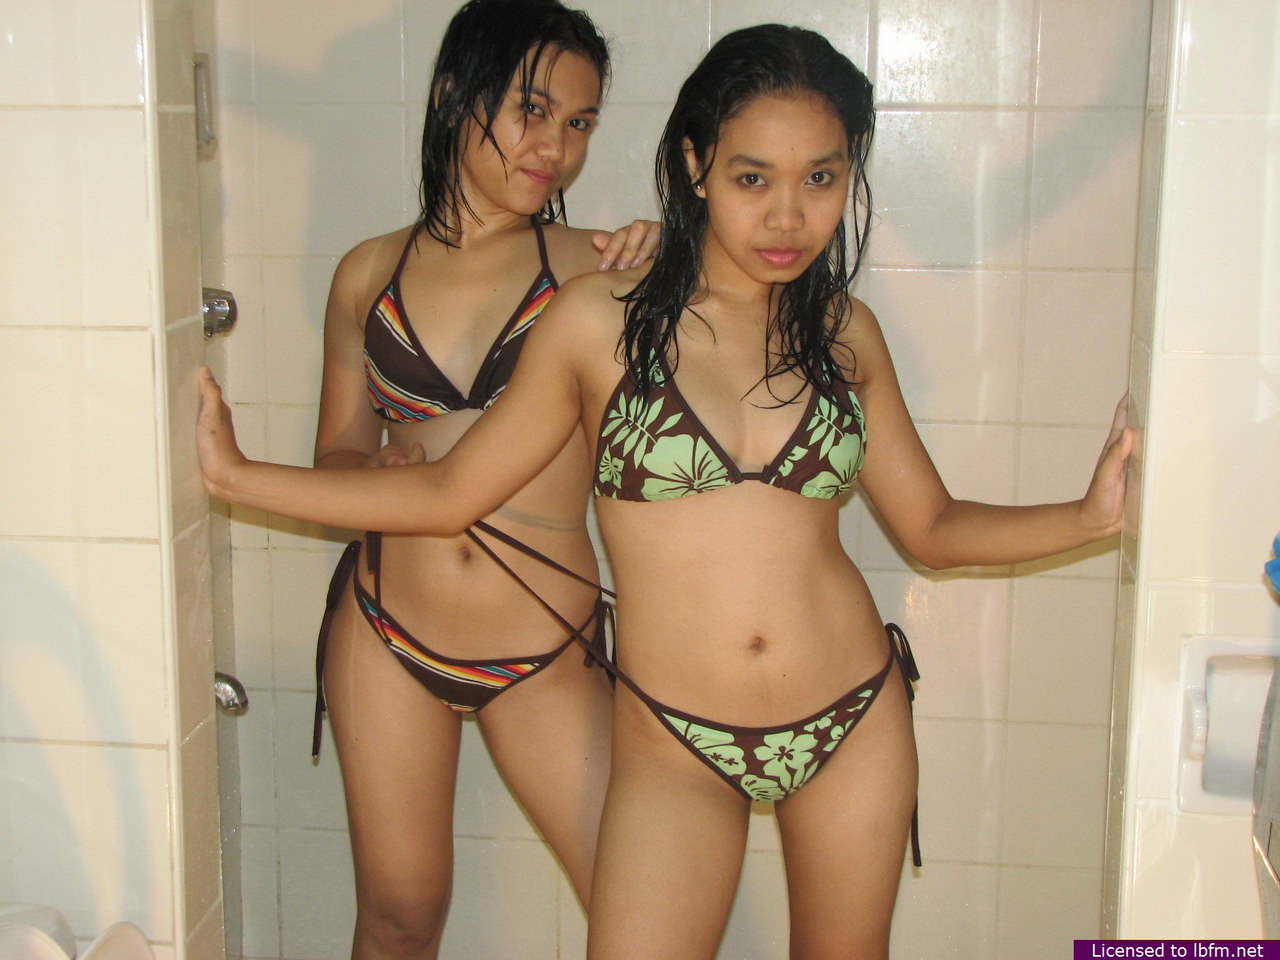 Young Asian amateurs share a lesbian kiss while getting naked in the shower foto pornográfica #426676970 | LBFM Pics, Tiny Tits, pornografia móvel